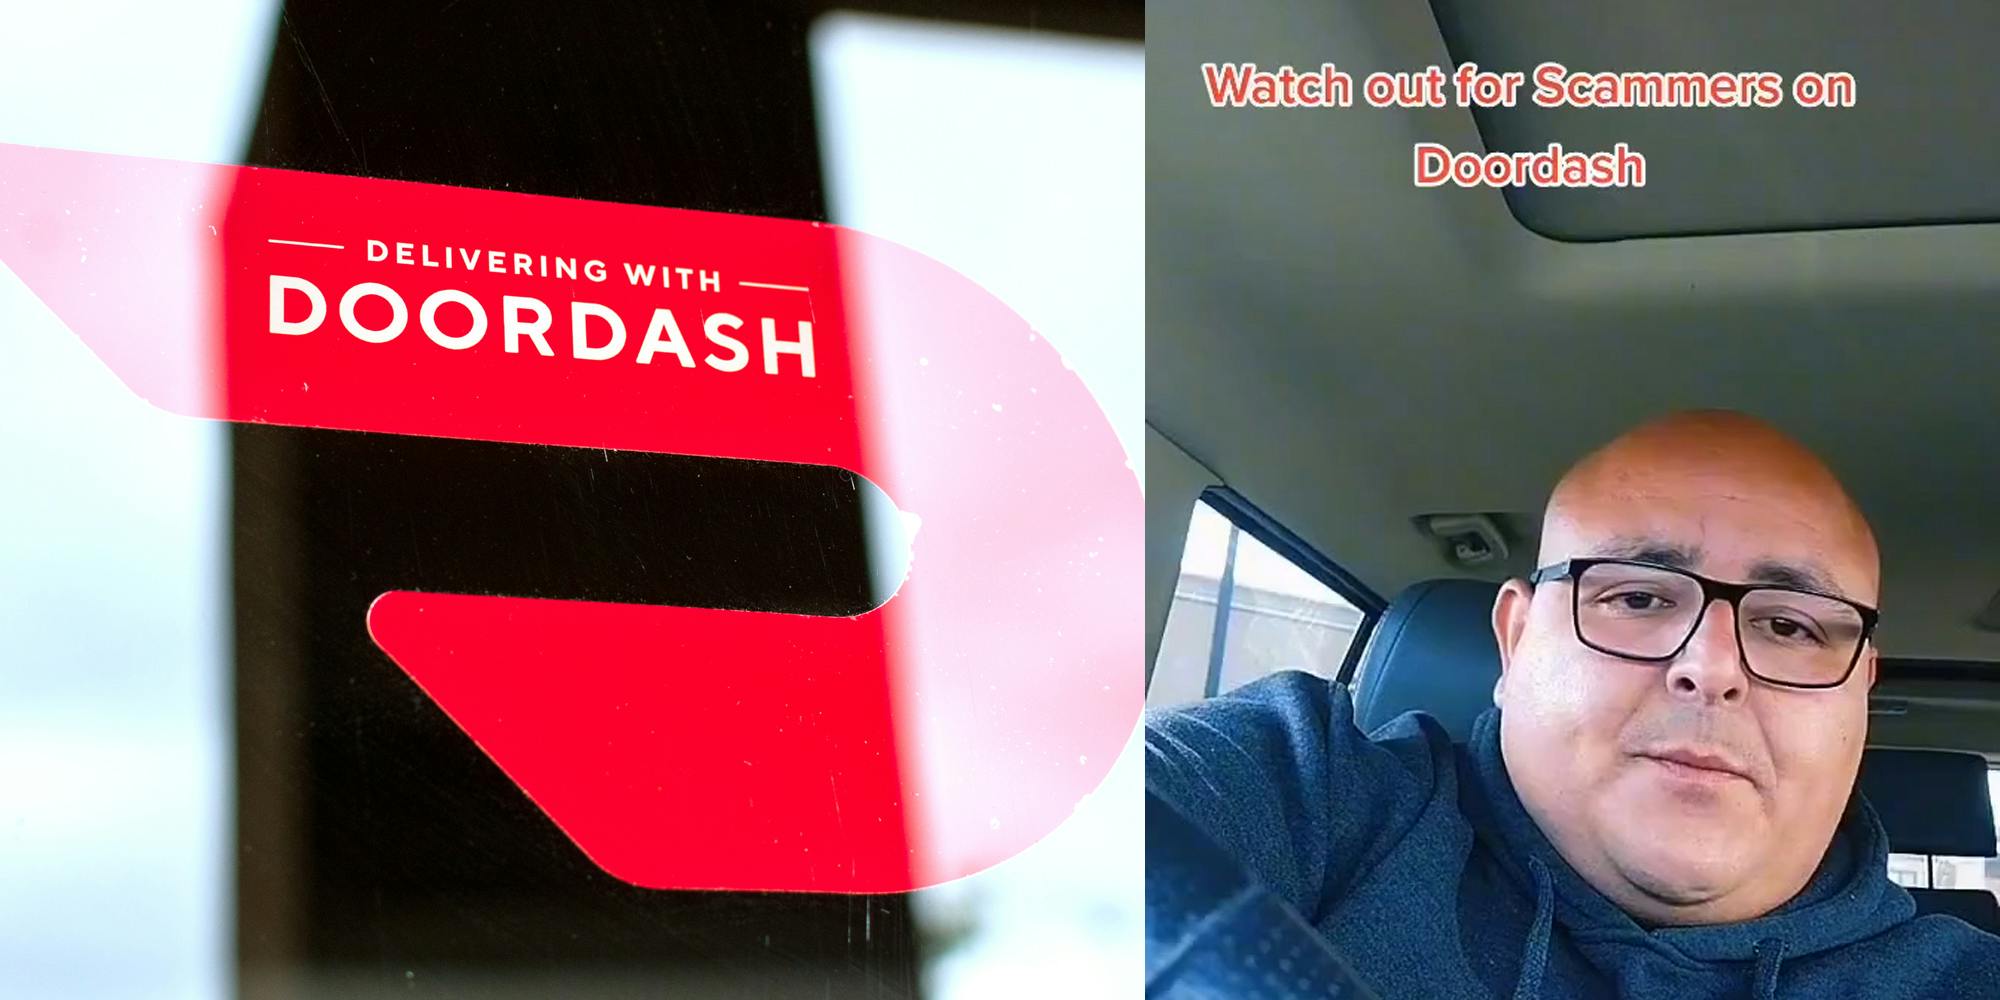 doordash logo in window (l) man in car with 'watch out for scammers on doordash' caption (r)